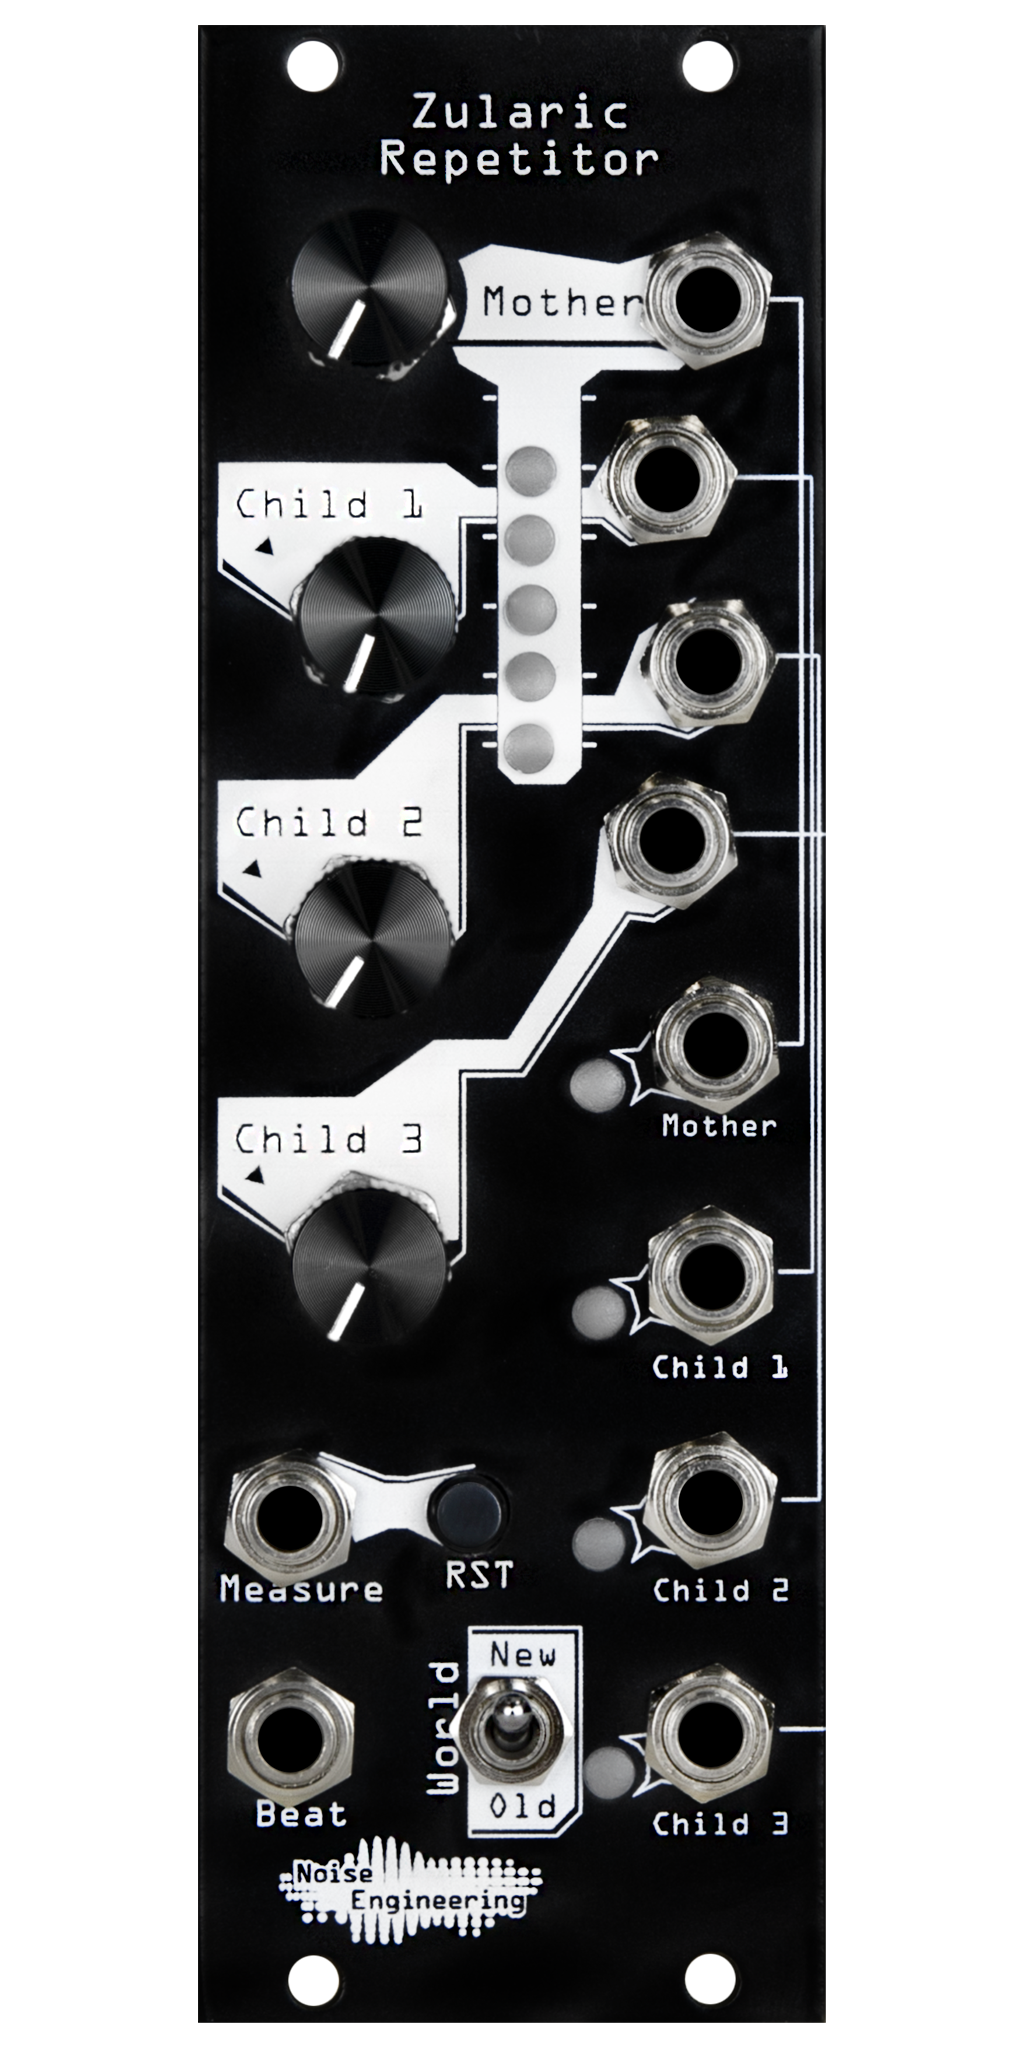 Zularic Repetitor black Eurorack rhythm generator module with stylized art, with four knobs and LEDs at top connecting to buttons, a switch, and jacks a the bottom and right side. | Noise Engineering